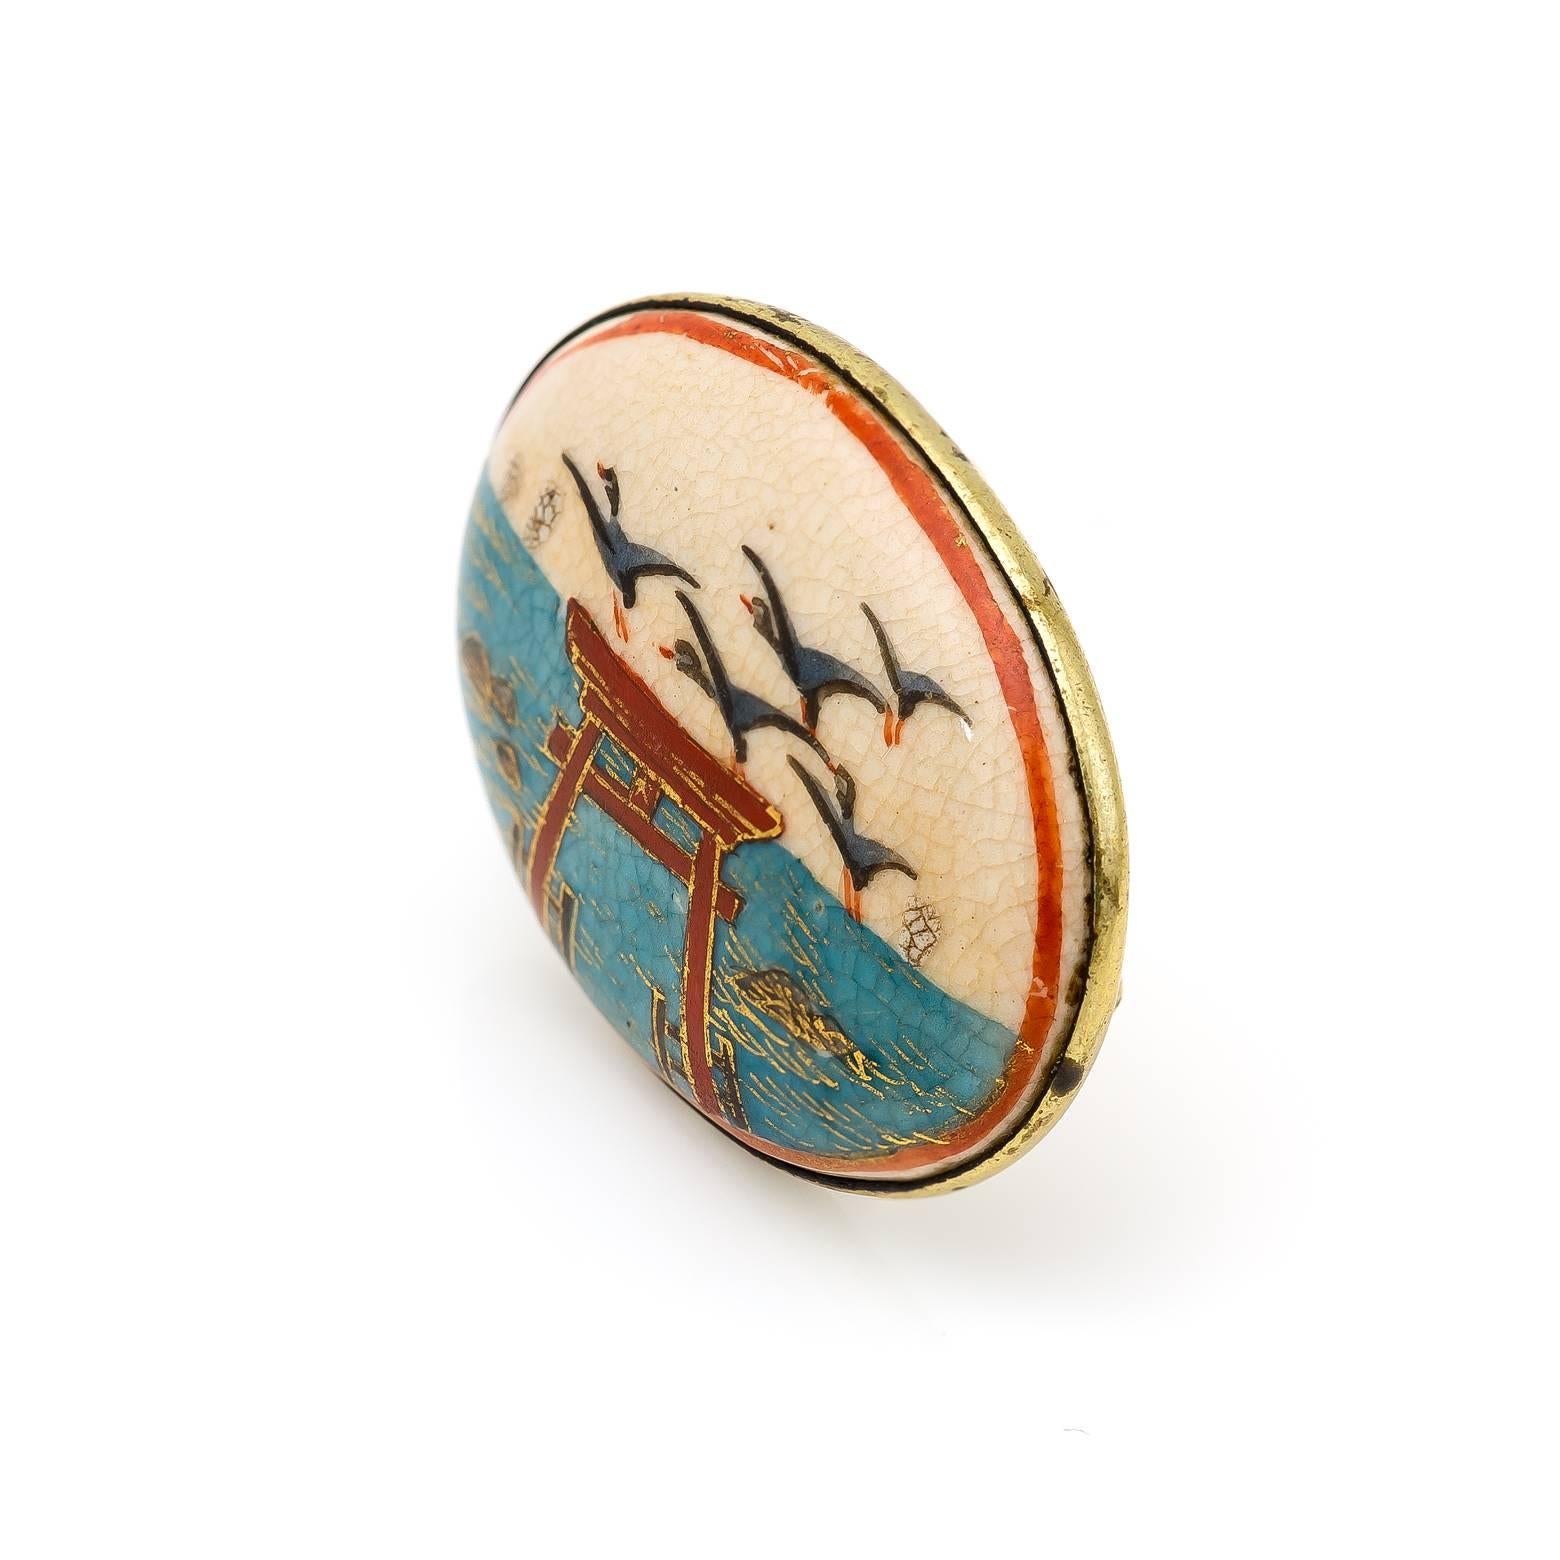 Artist Japanese Torii and Crane Pin in Enamel circa 1940s with Blues Reds and Golds